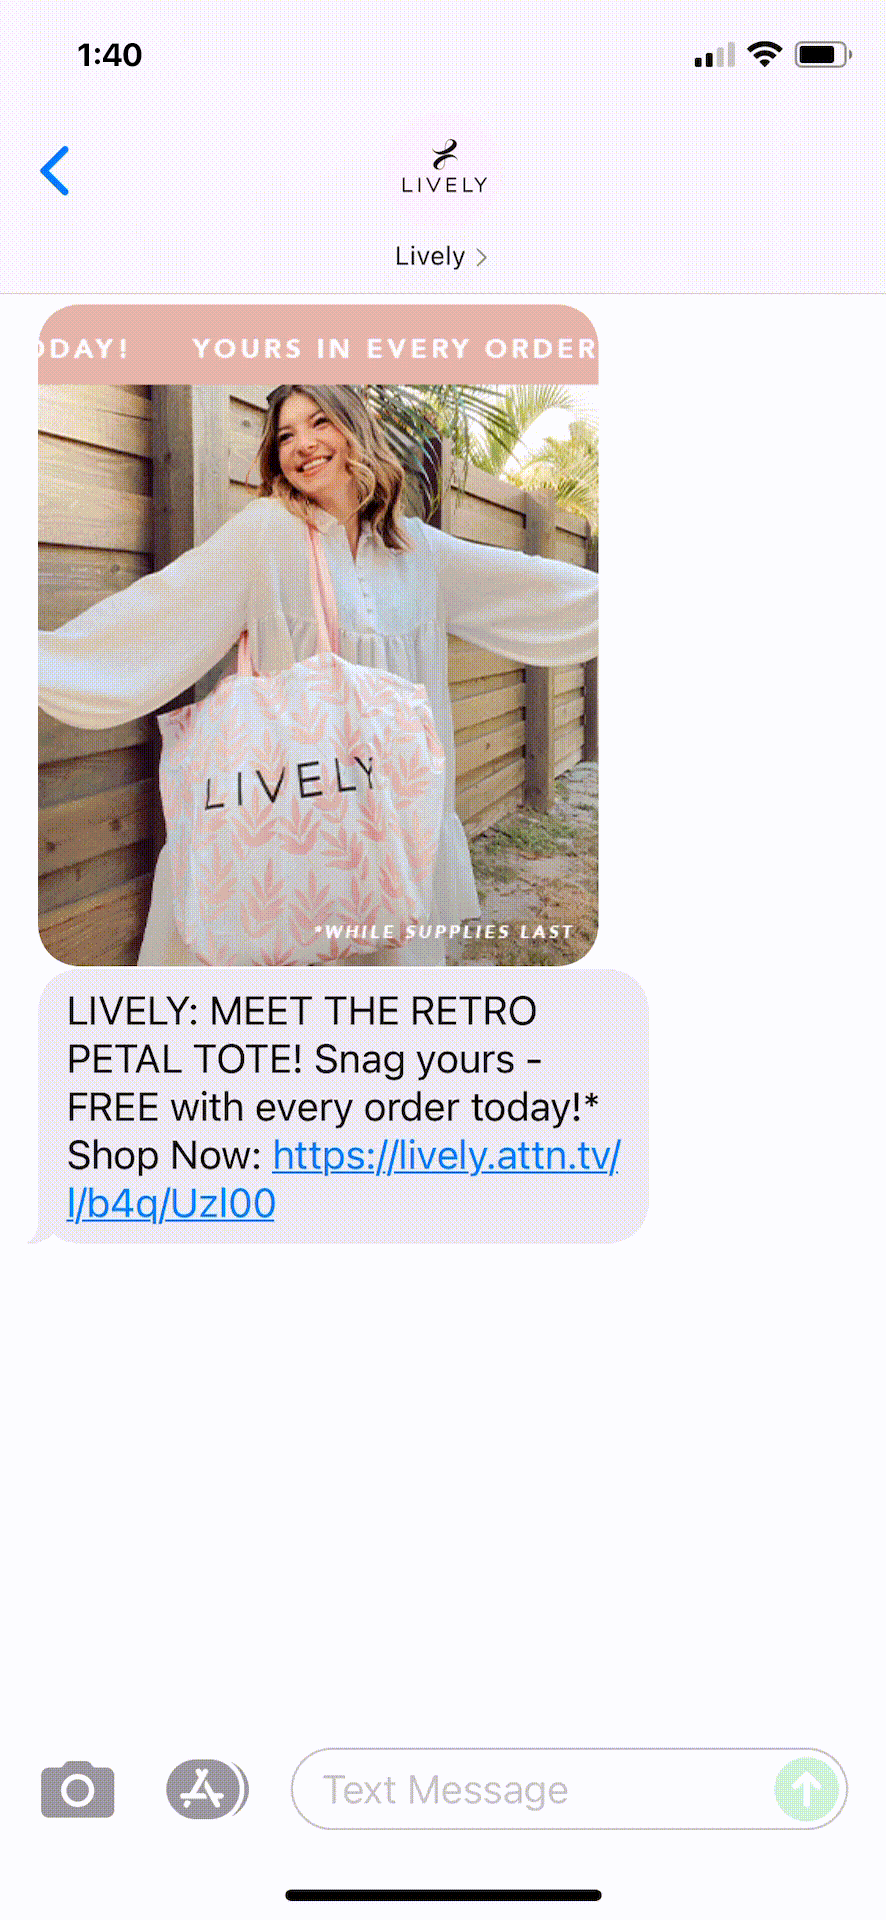 Lively-Text-Message-Marketing-Example-08.12.2021